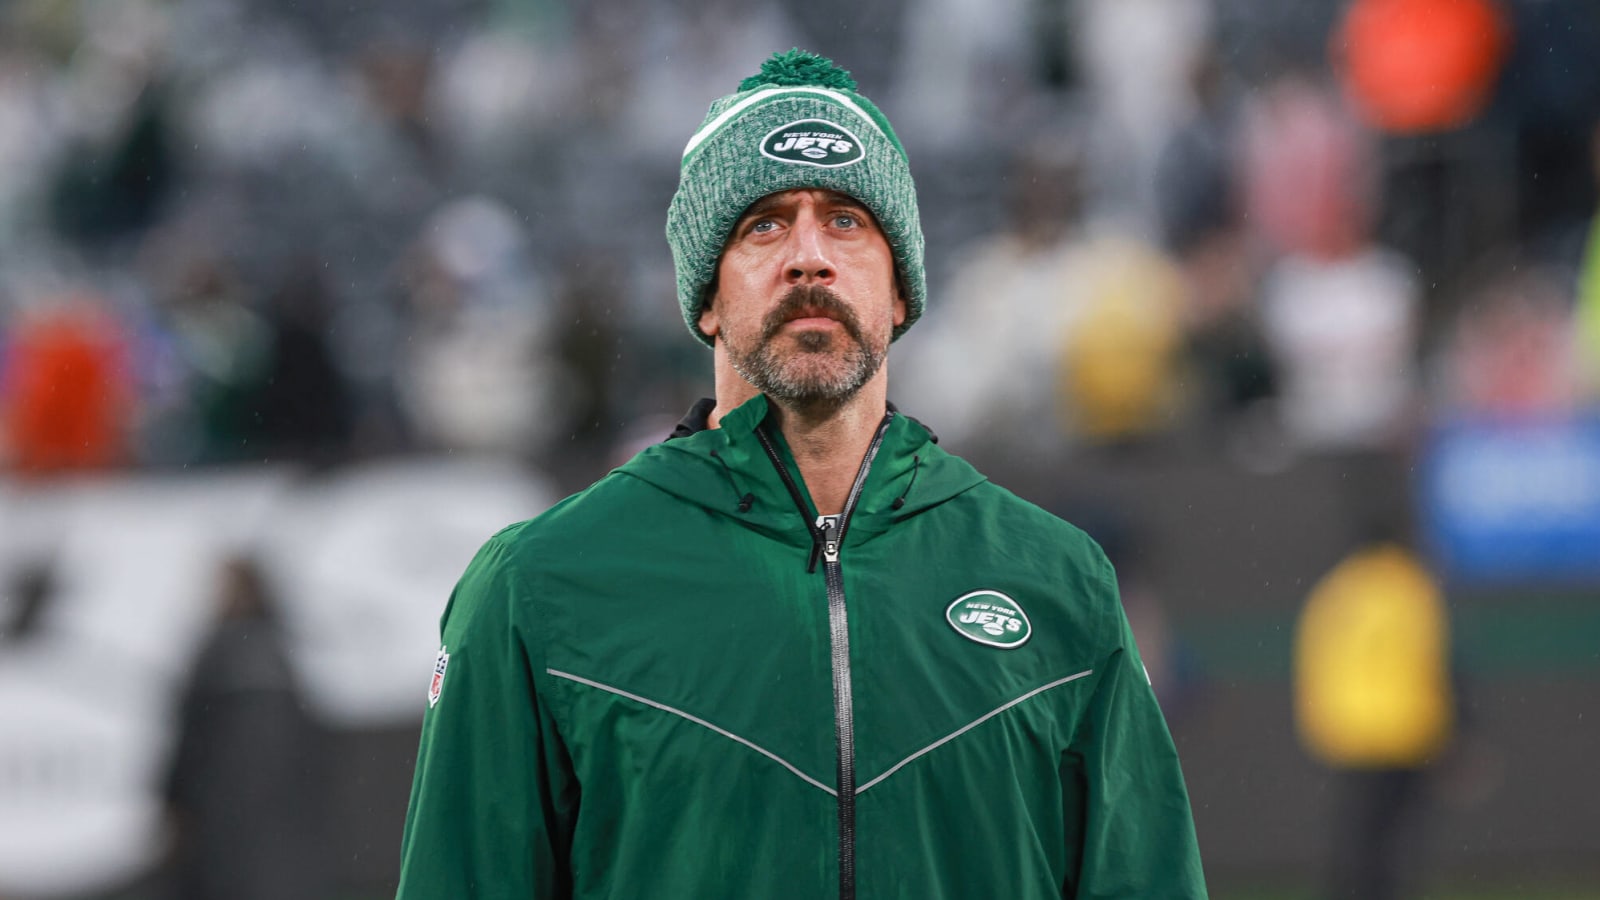 Jets' Aaron Rodgers reveals if he considered vice presidential role